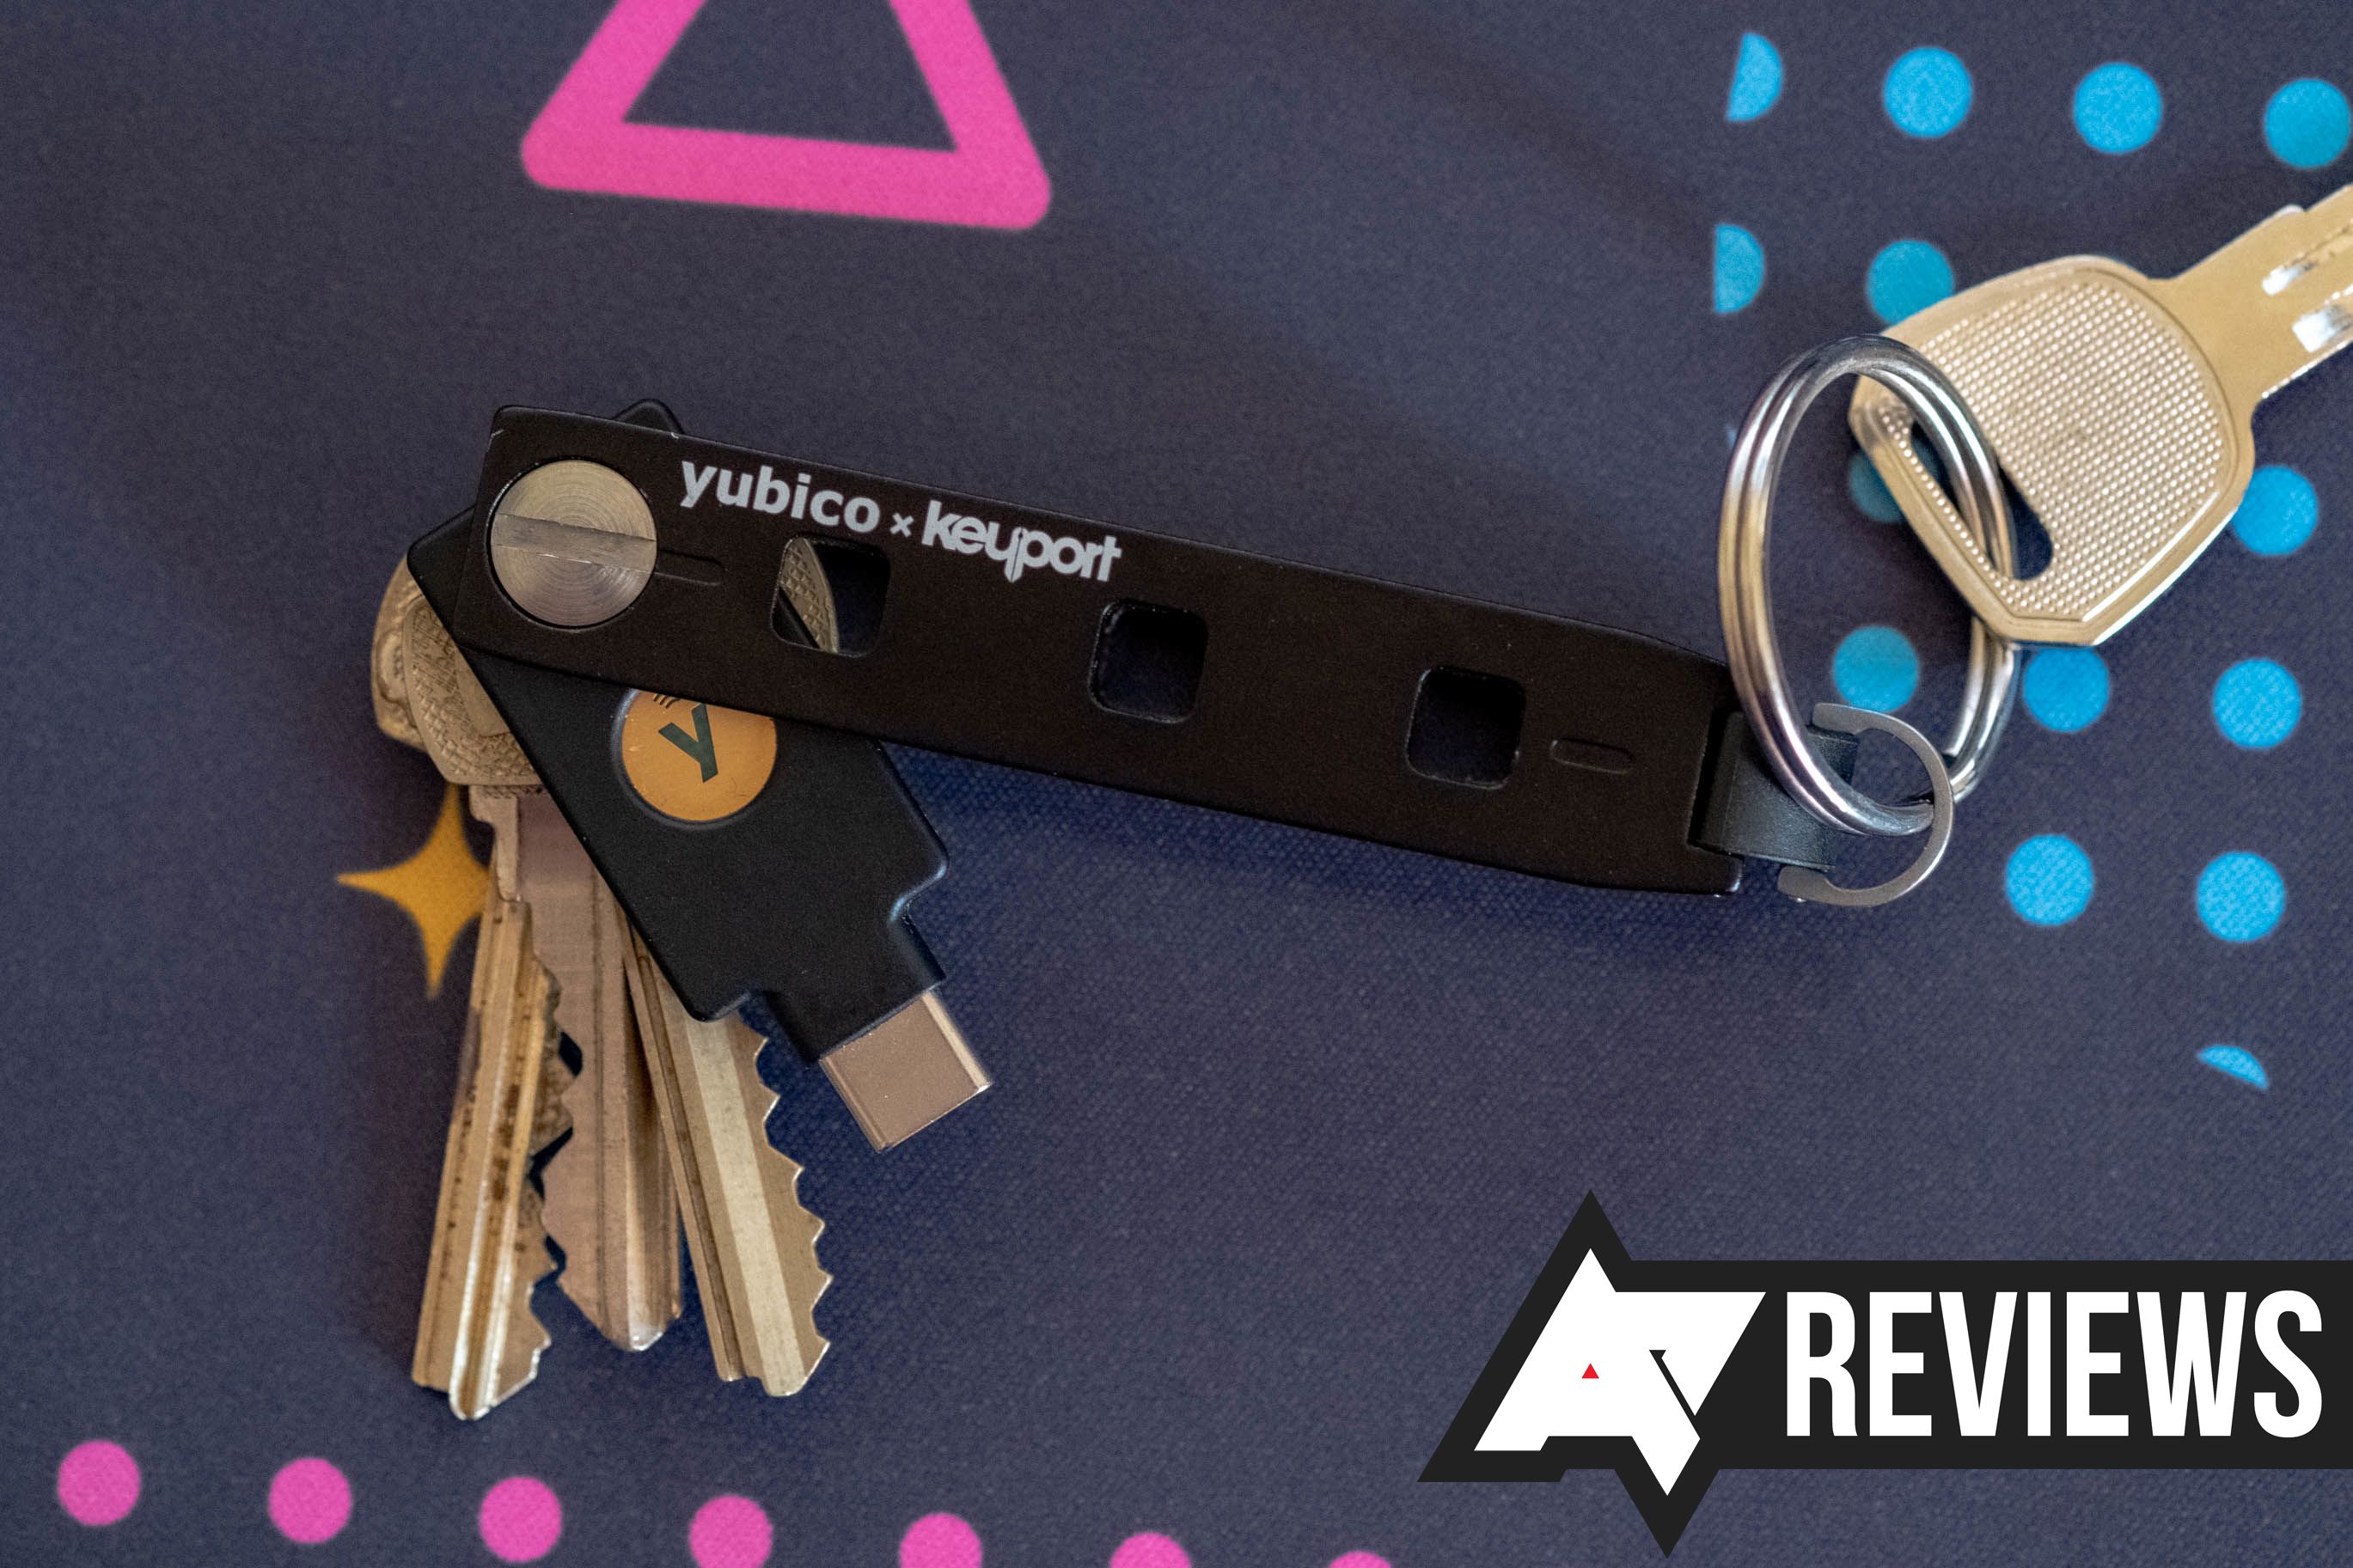 Yubiko Keyport Pivot 2.0 review: A two-factor stocking stuffer you should have bought last month